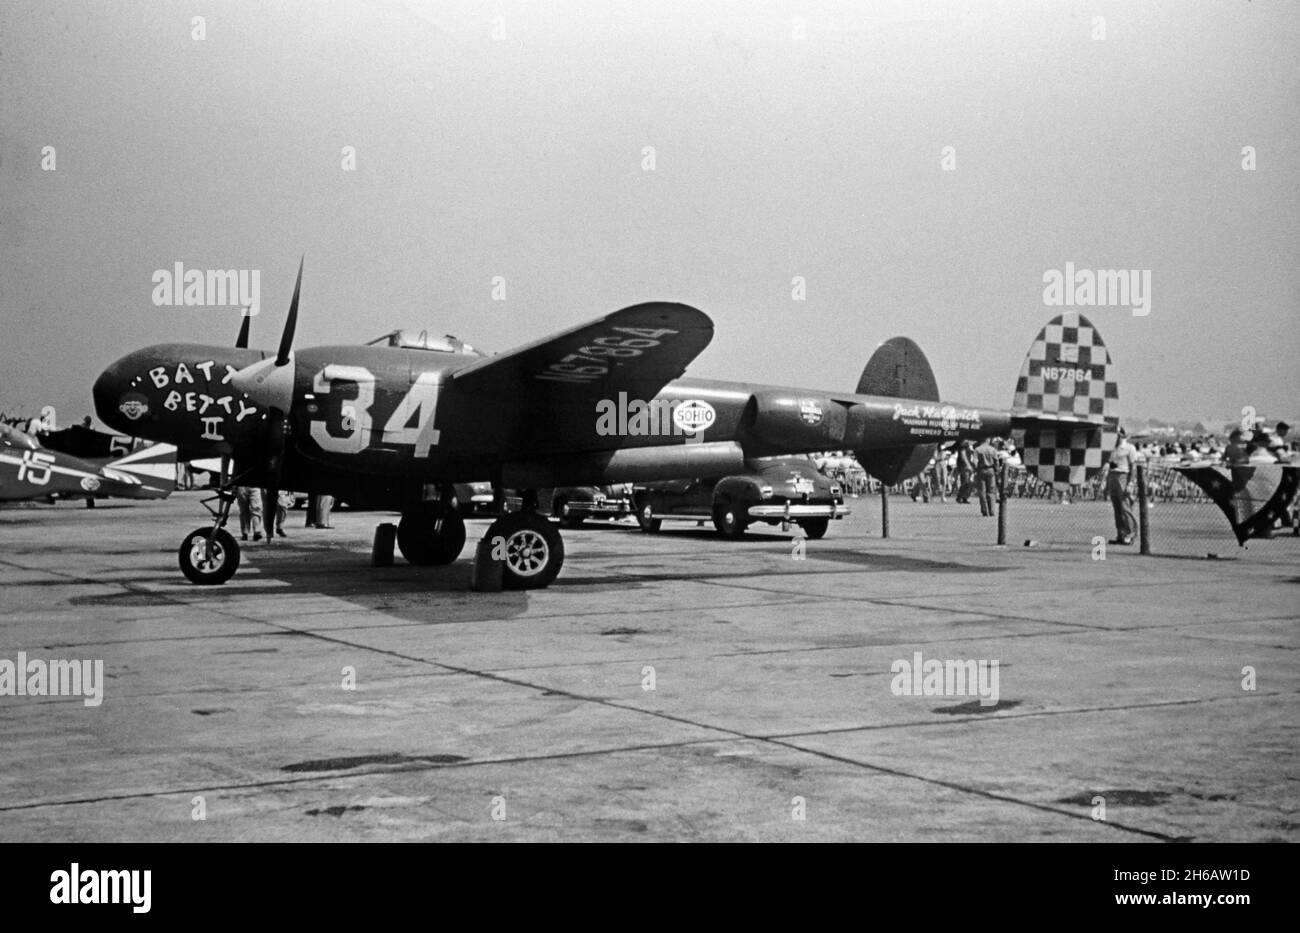 Vintage photograph taken in September 1948 at Cleveland, Ohio, USA. Photo shows an aircraft at an Airshow or Air Race. A Lockheed F-5G Lightning, 'Batty Betty II', serial number N67864. Stock Photo